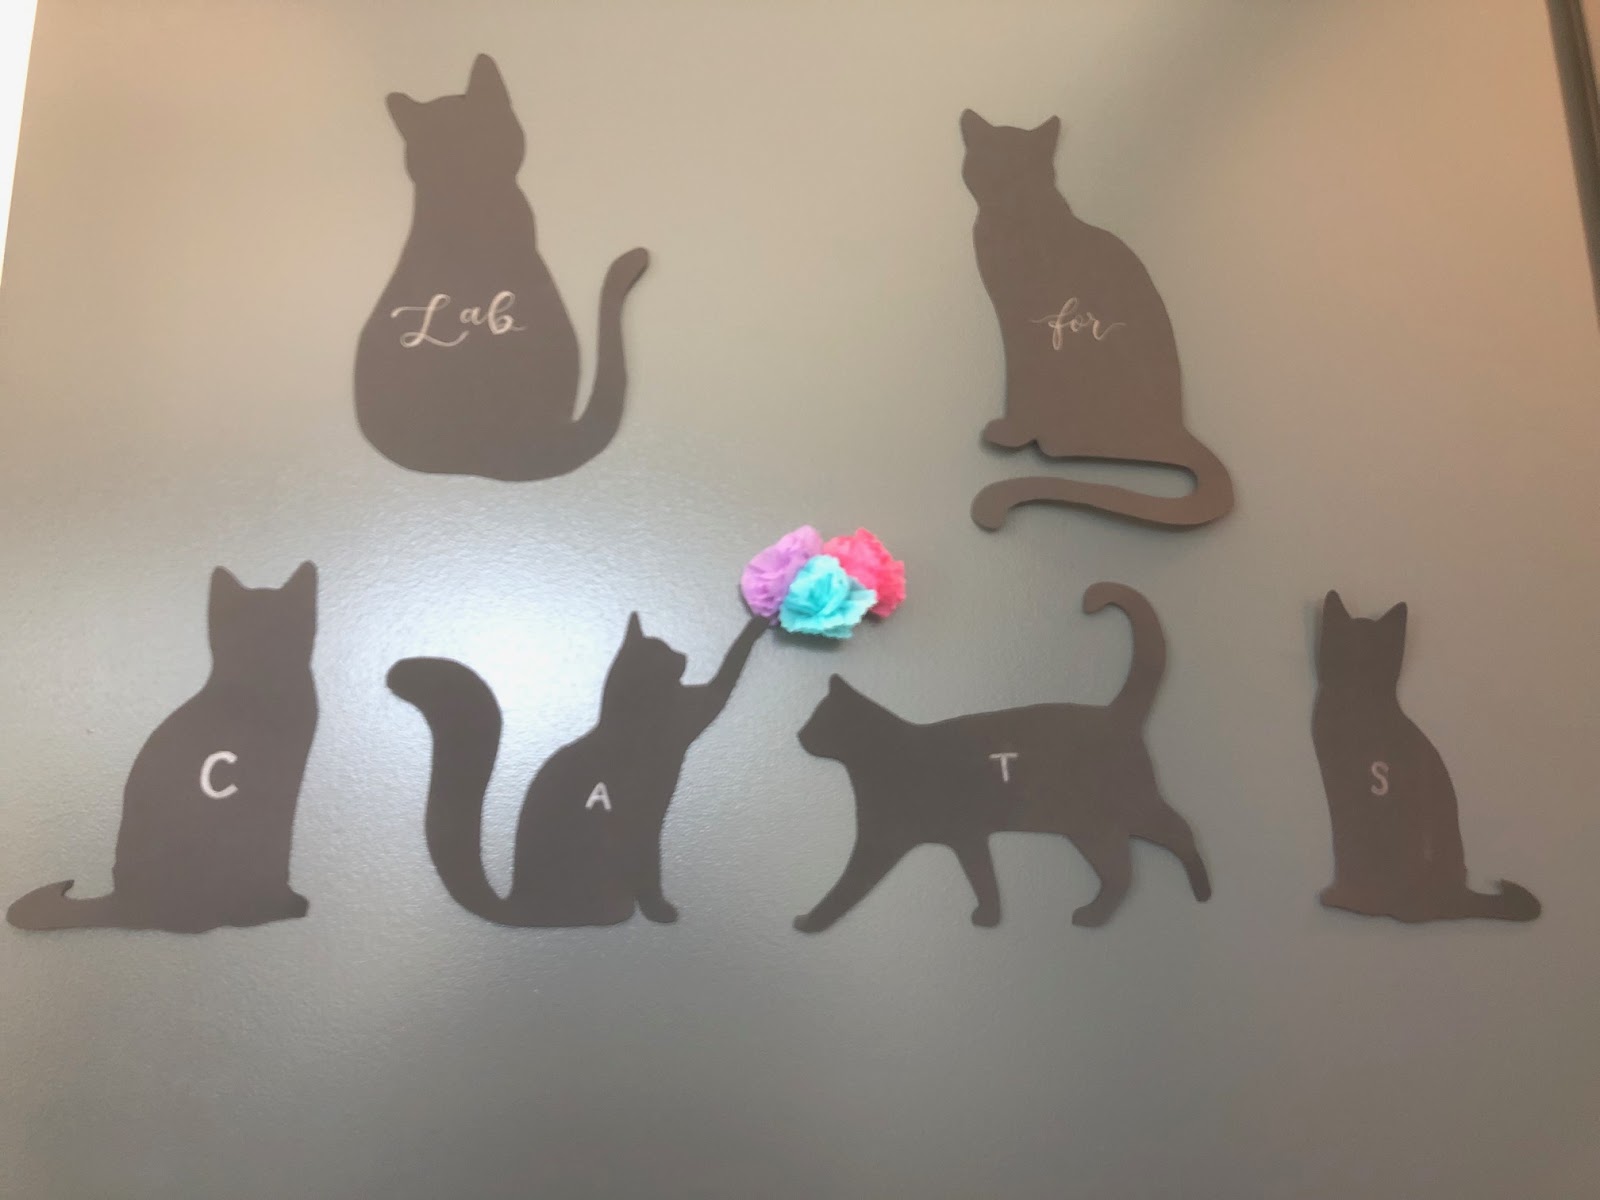 Paper cutouts of cats spell "Lab for CATS" on a door.